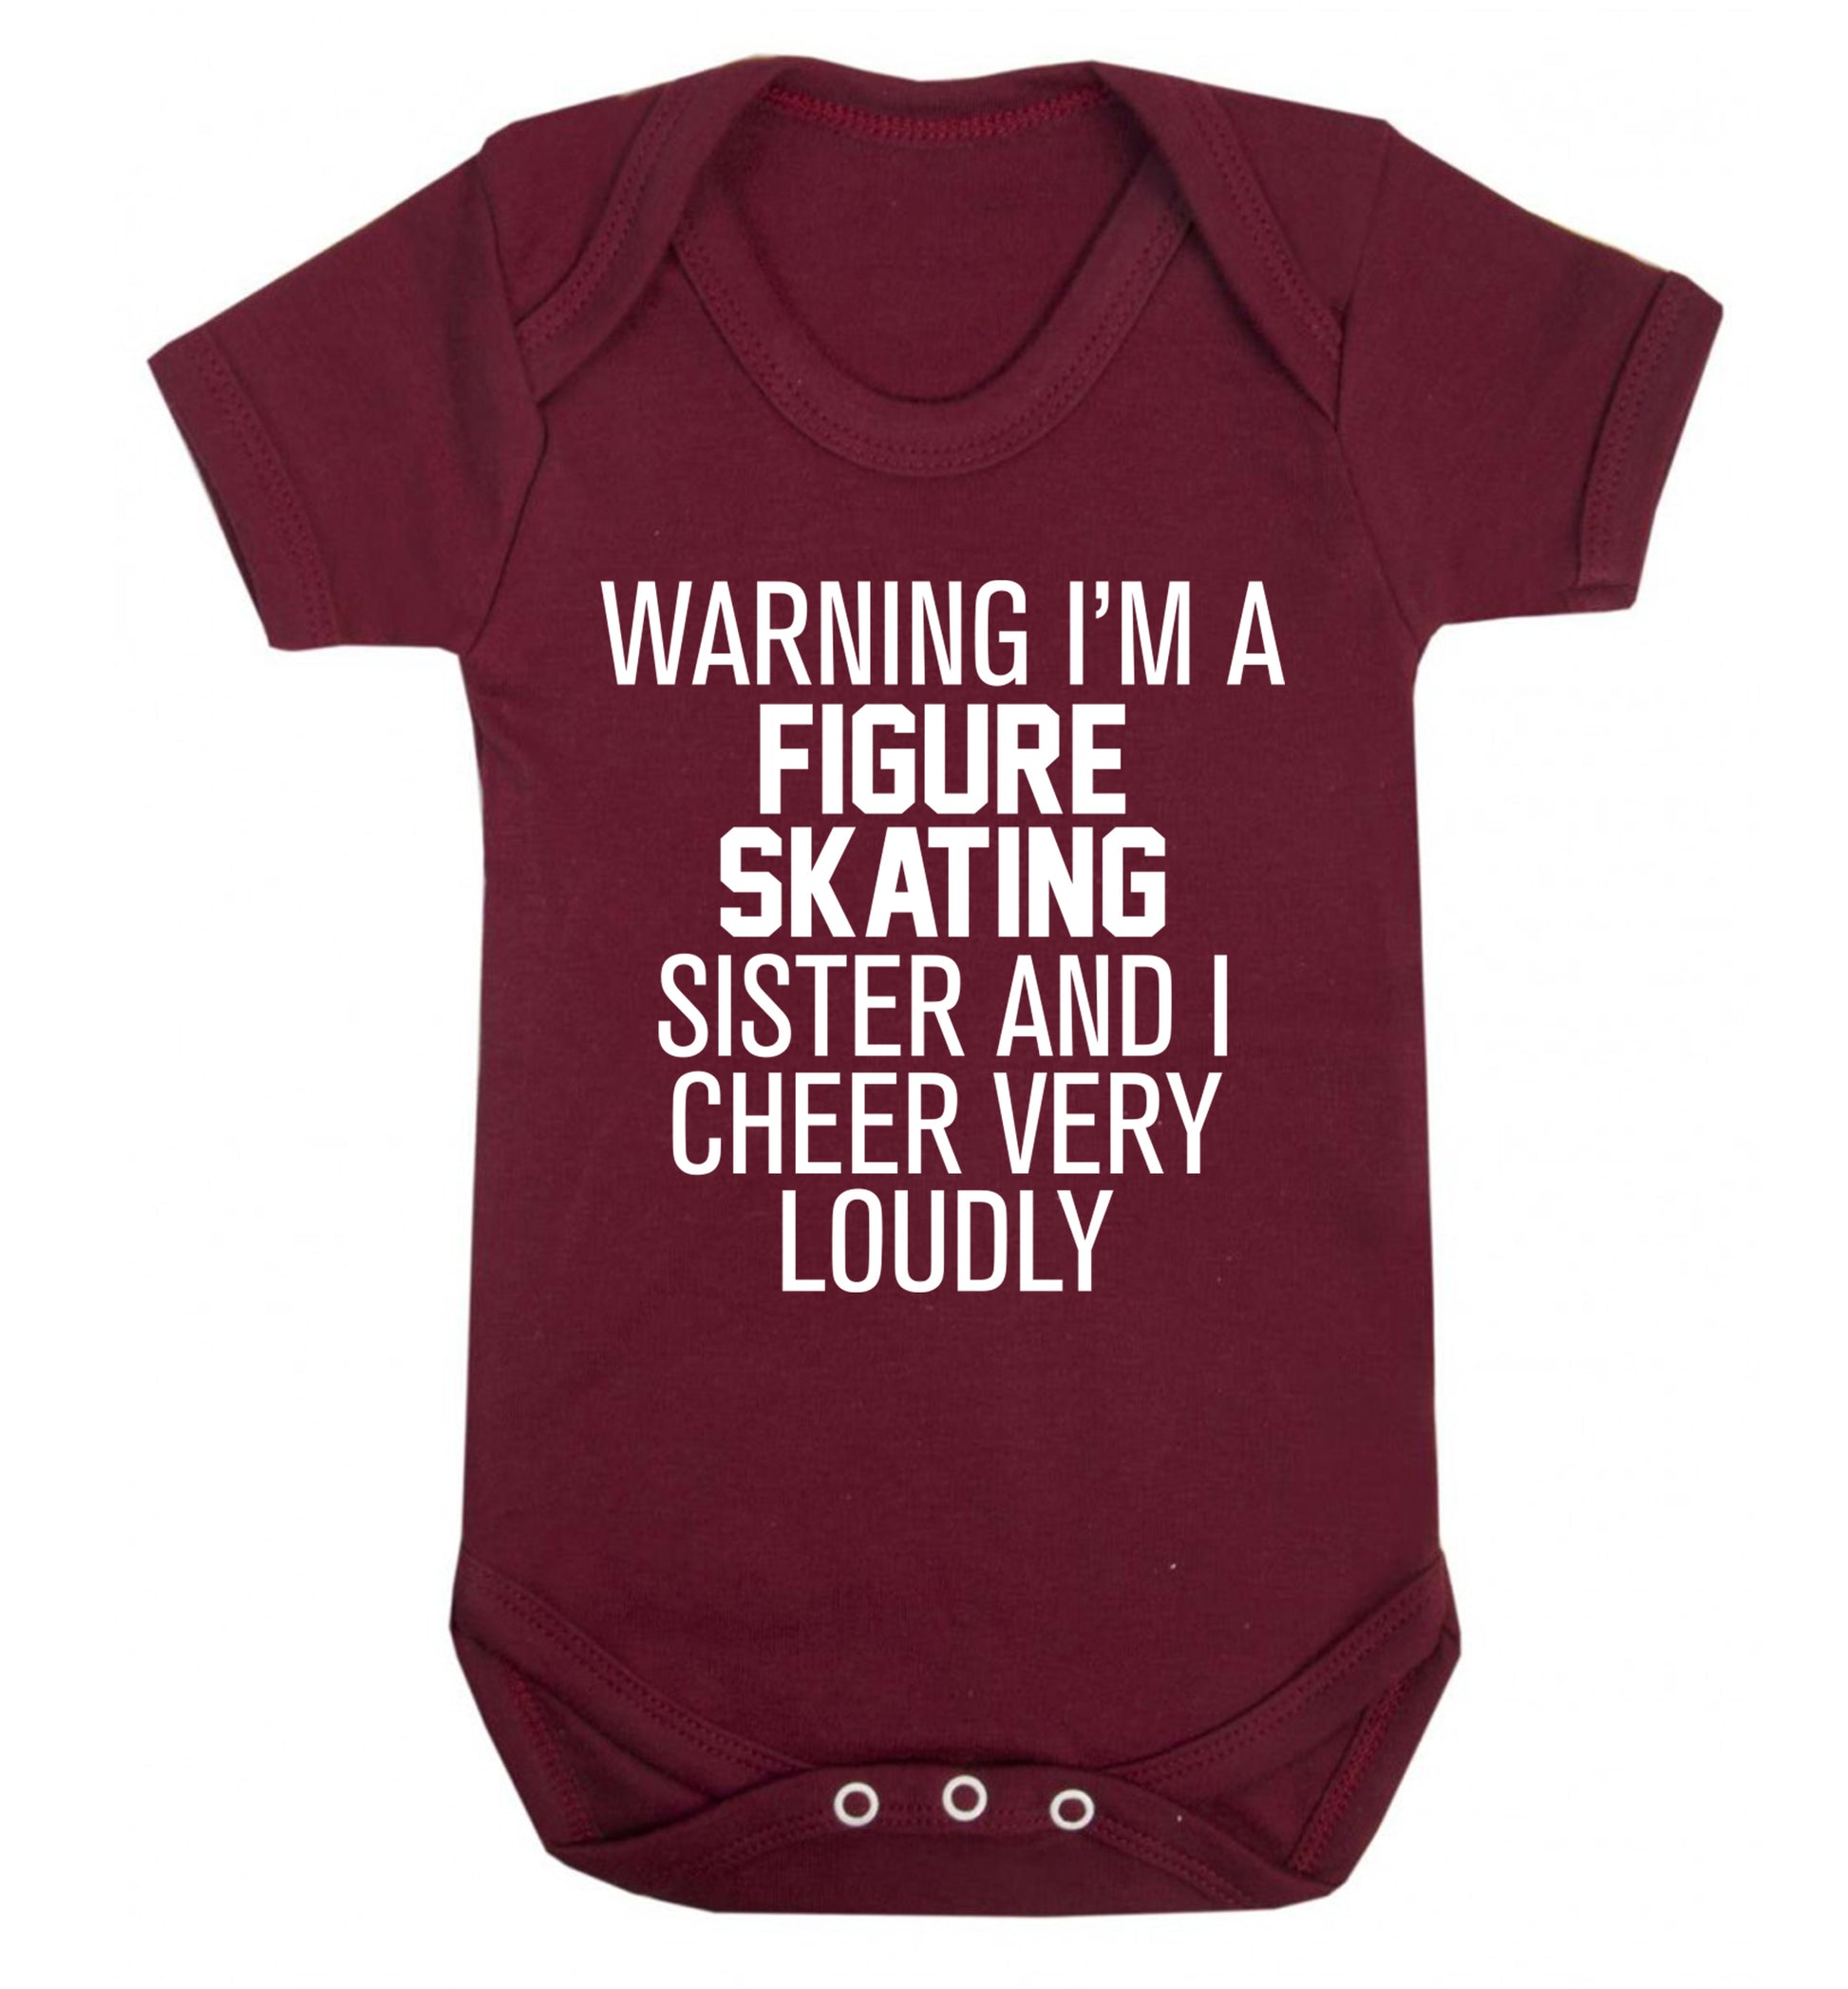 Warning I'm a figure skating sister and I cheer very loudly Baby Vest maroon 18-24 months